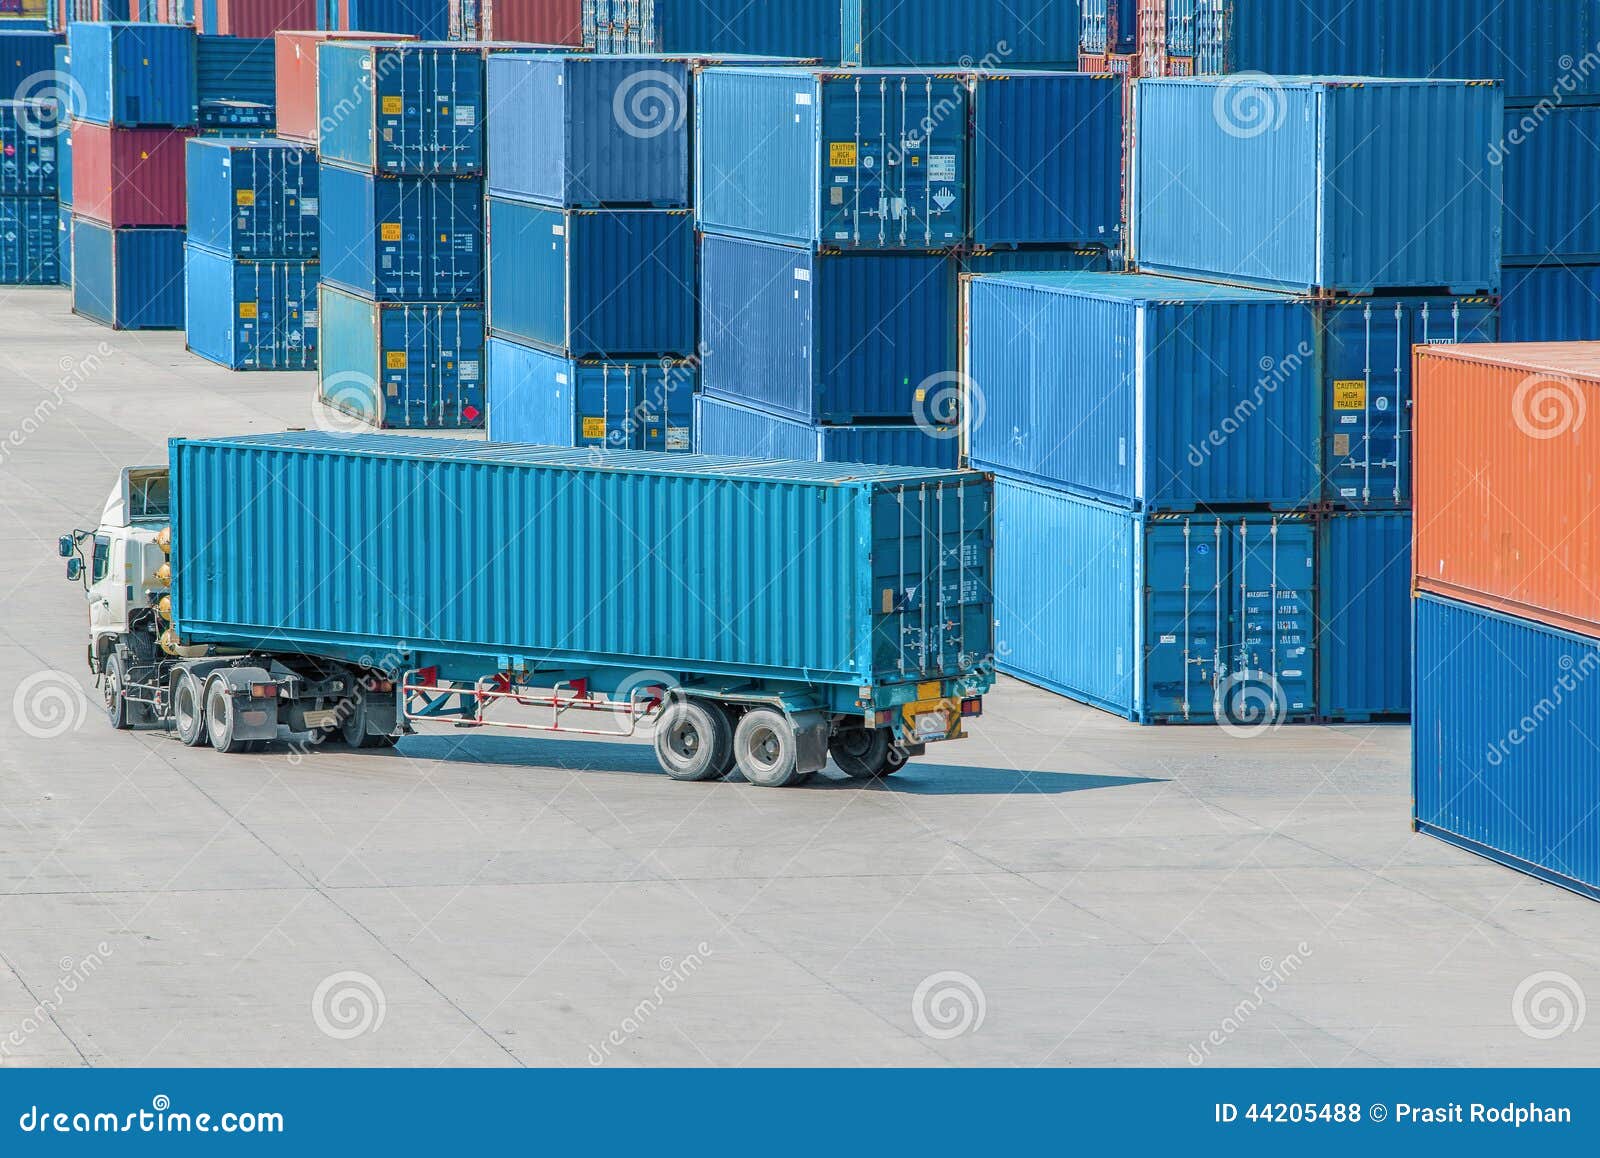 truck in container depot